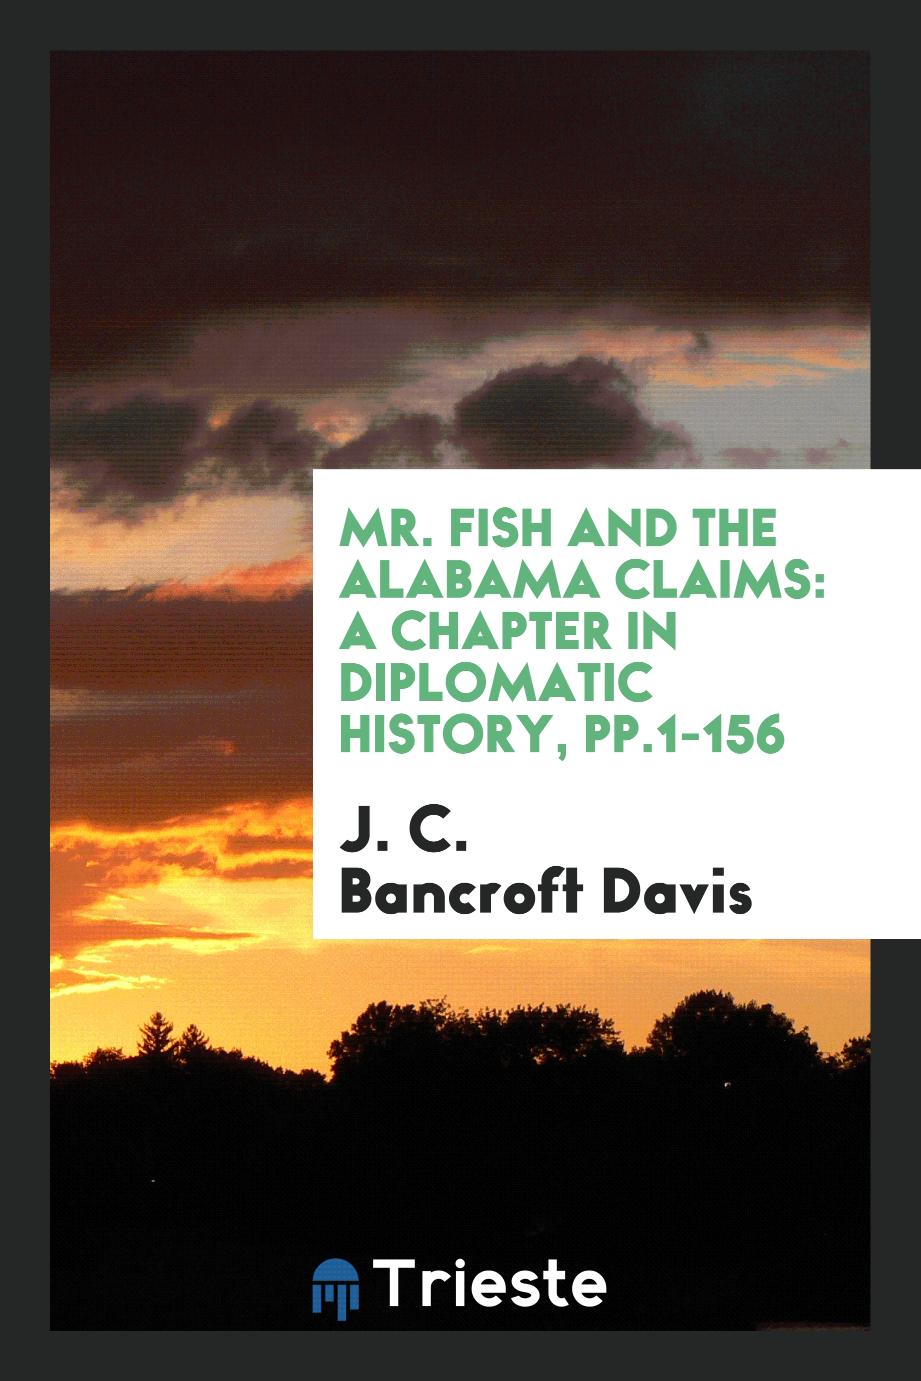 Mr. Fish and the Alabama Claims: A Chapter in Diplomatic History, pp.1-156